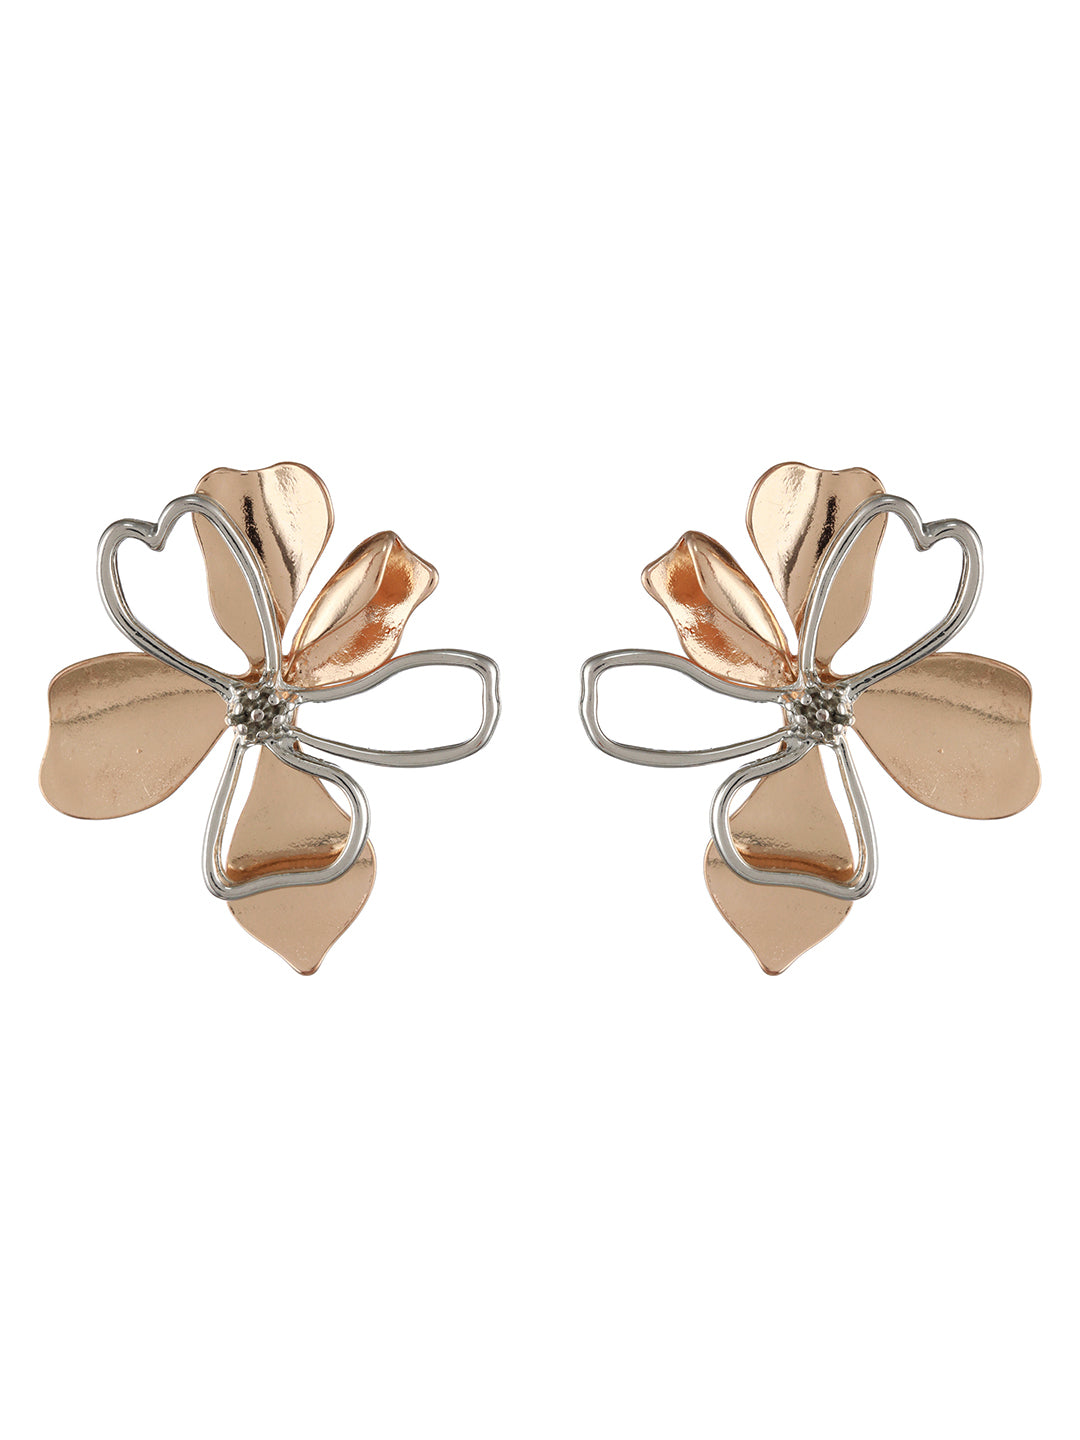 Floral Love Silver Rose Gold-Plated Earrings